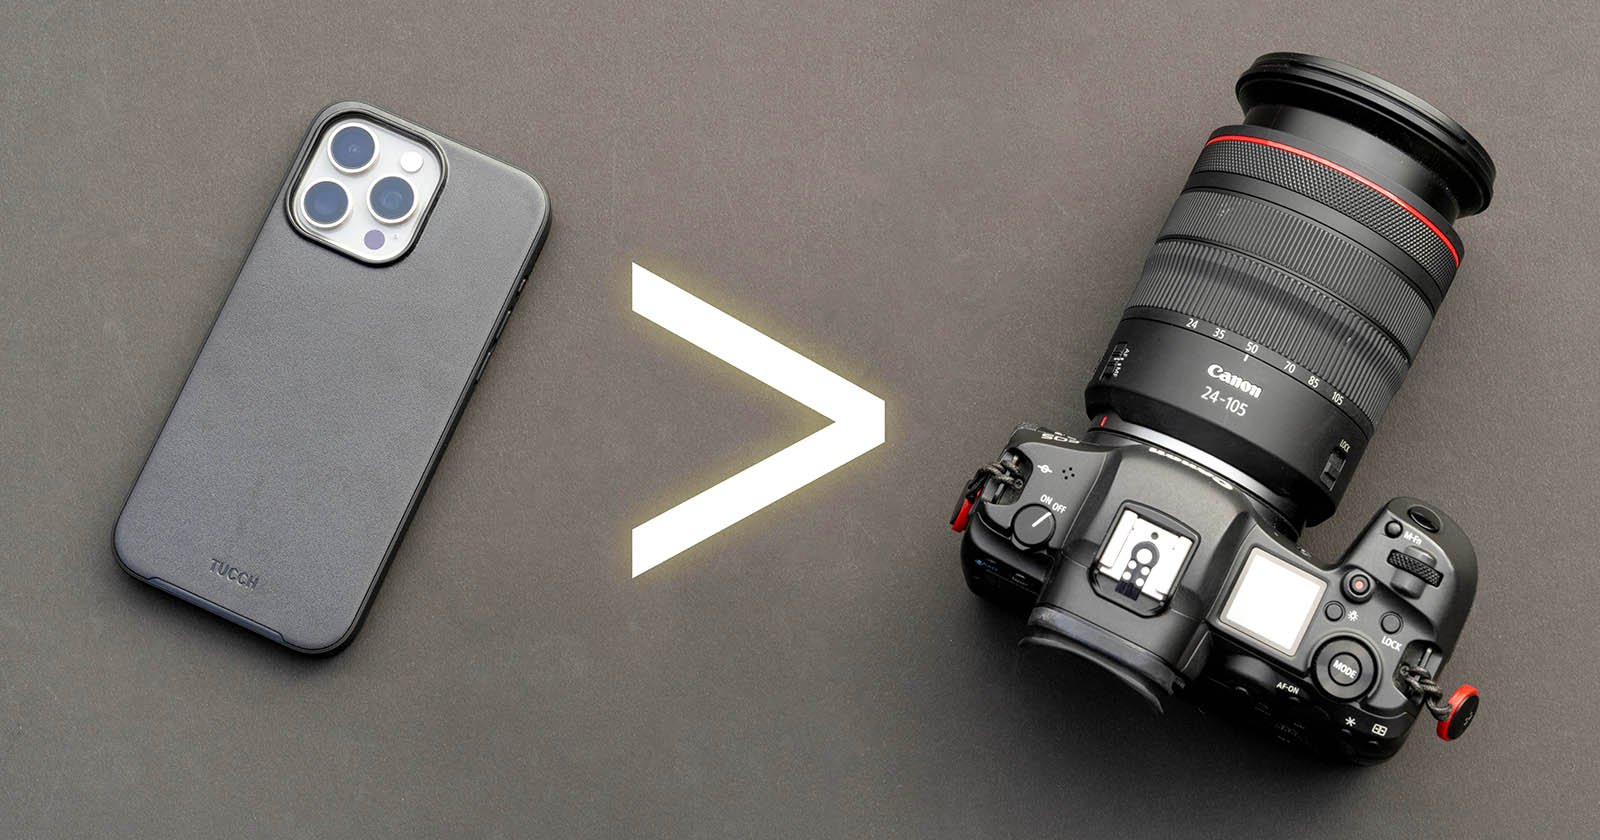 Smartphone vs Camera: The Best Camera is the One You Have With You